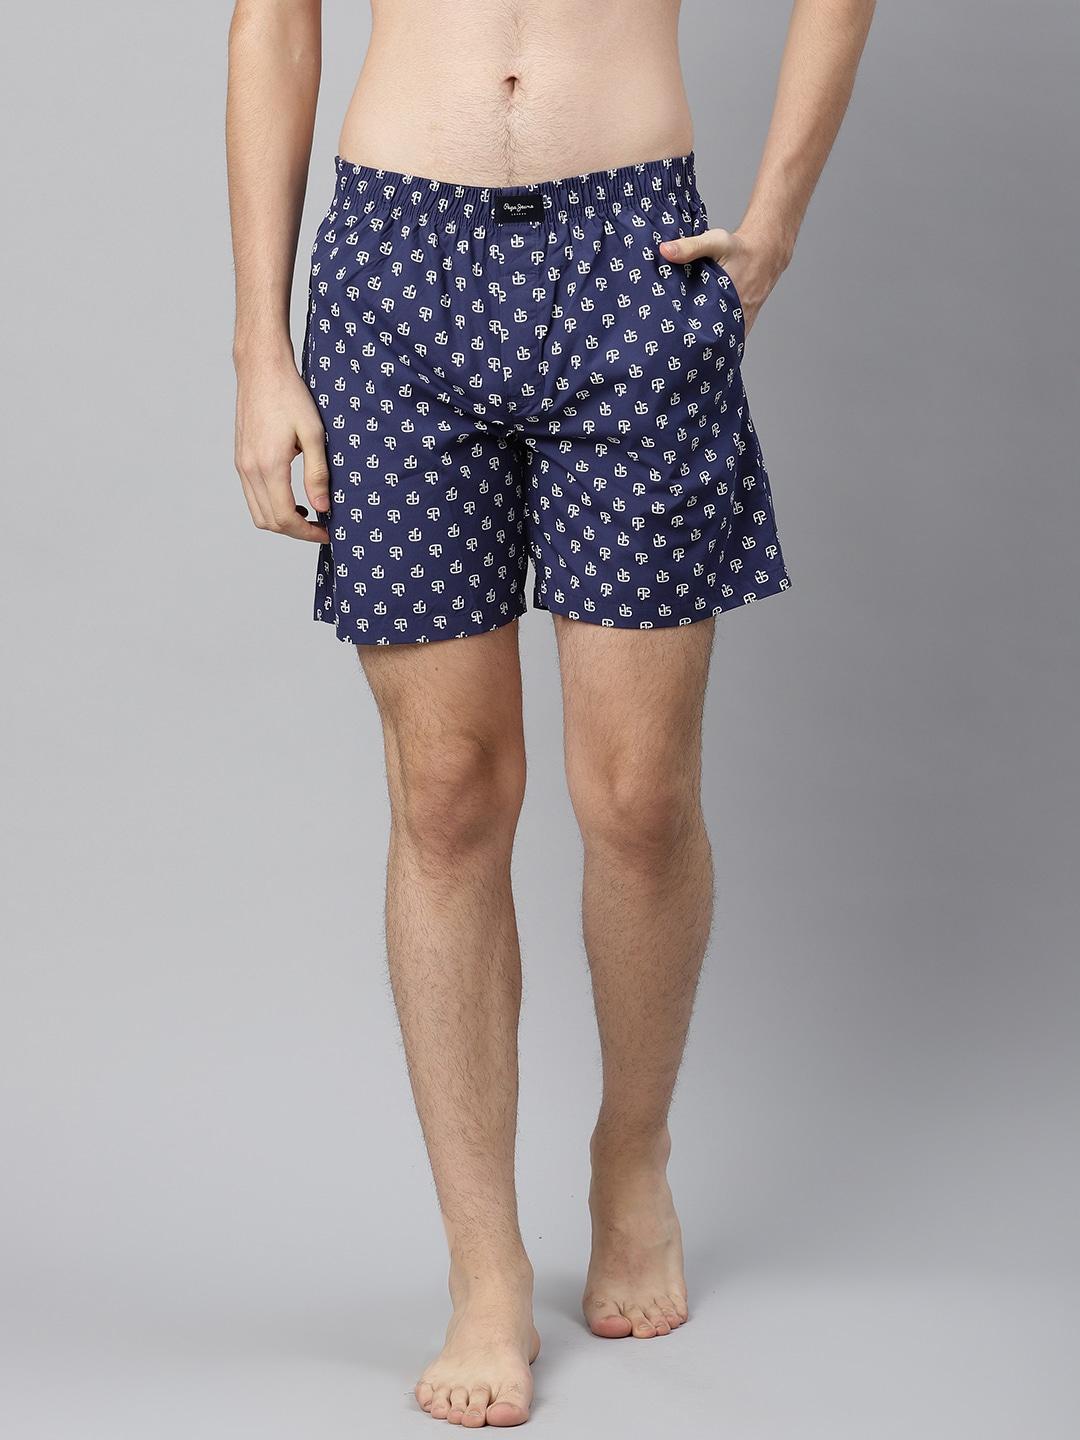 Pepe Jeans Men Navy Blue & White Pure Cotton Printed Boxers 8904311334187